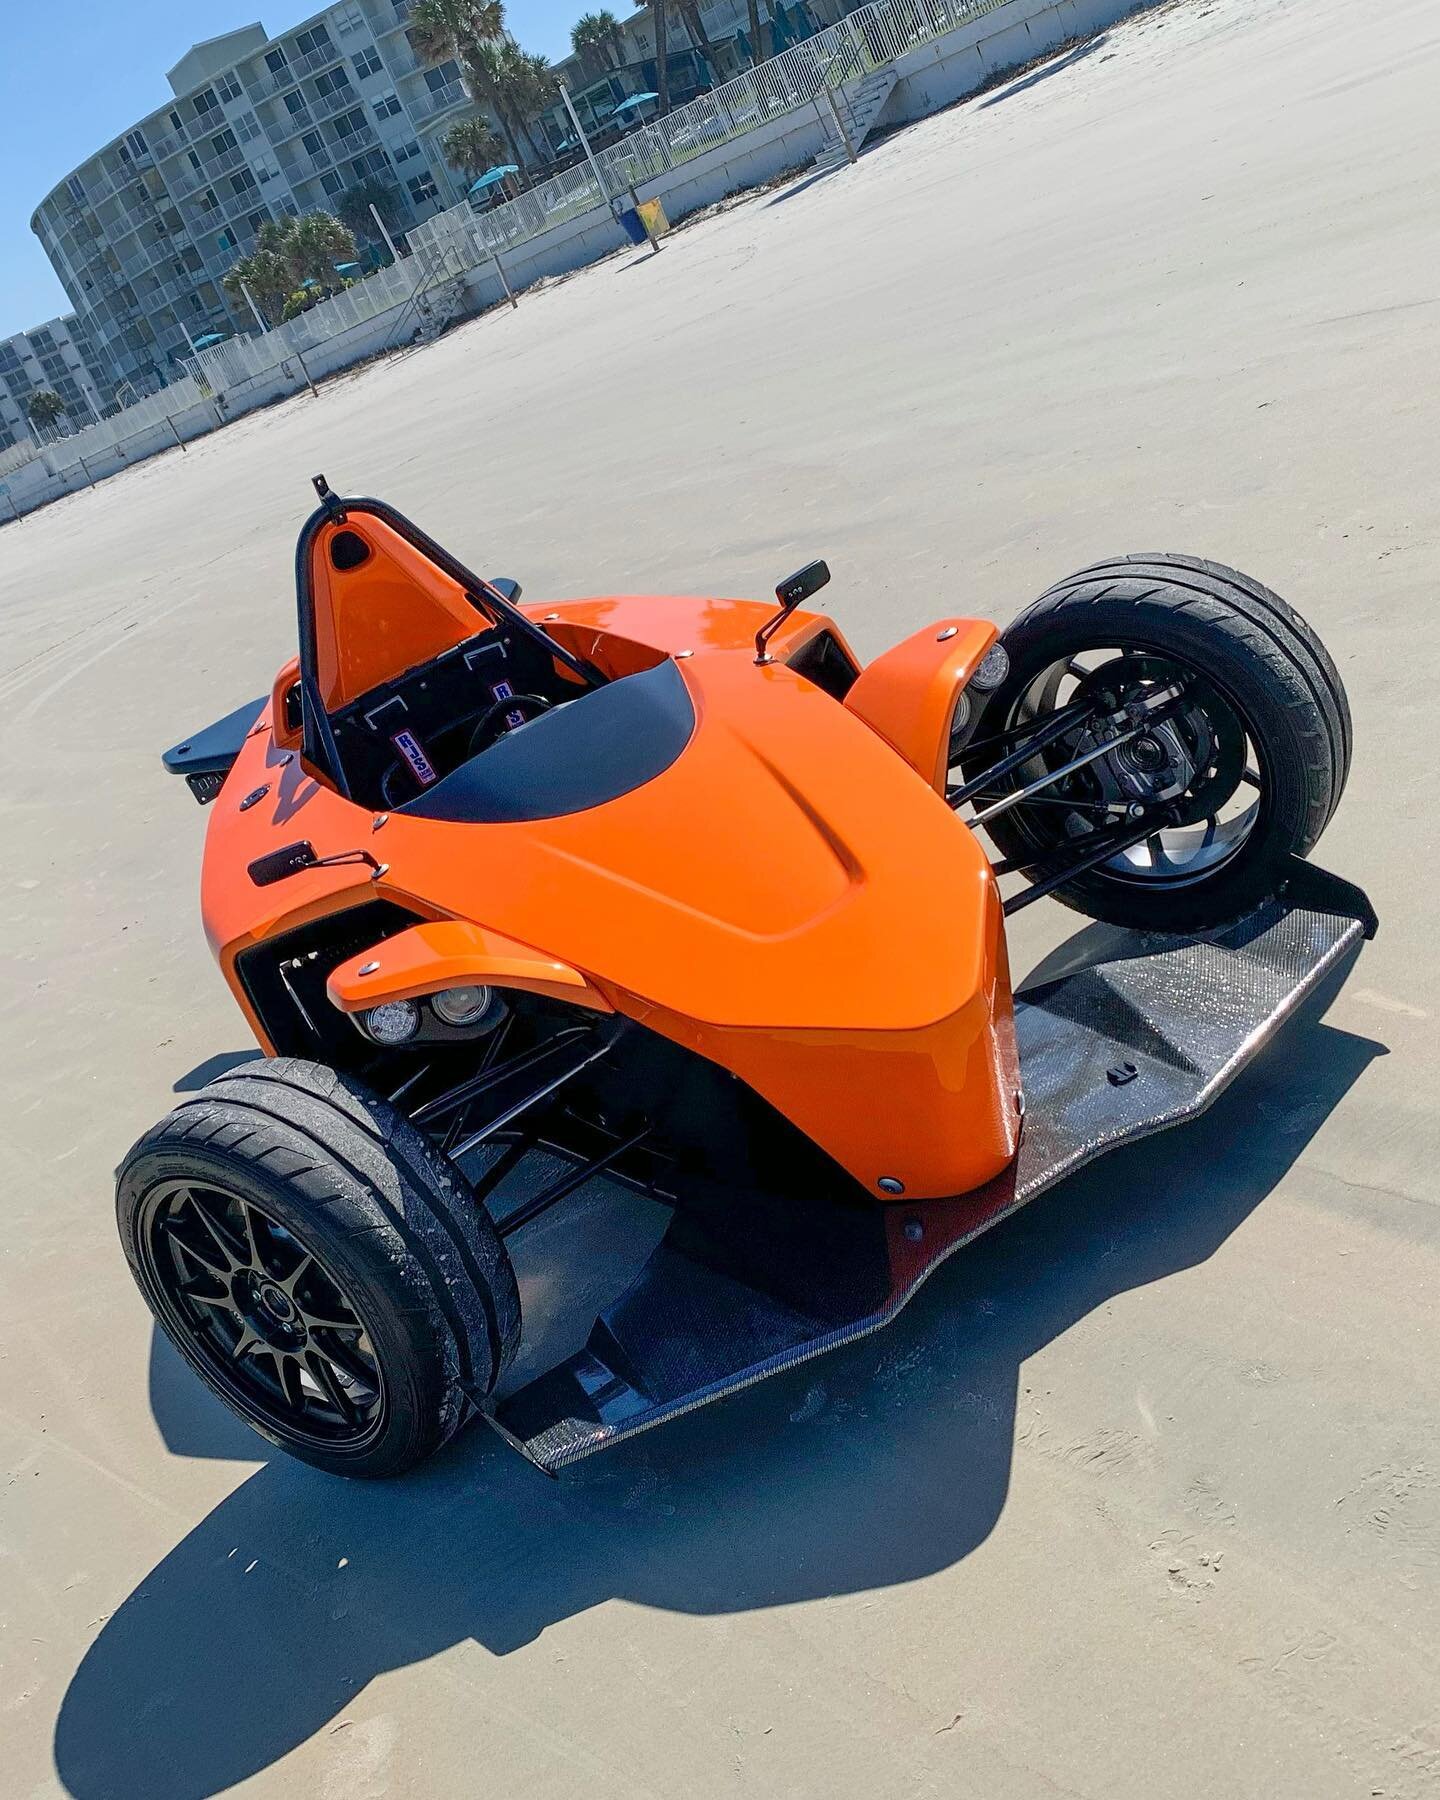 Thinking back to our spring break road trip to #daytonabeach and wishing we were back in the sunshine state for the Miami GP this weekend! 
&bull;
#corsoconcepts #corsocalifornia #trike #autocycle #reversetrike #kitcar #builtnotbought #sportscar #sup